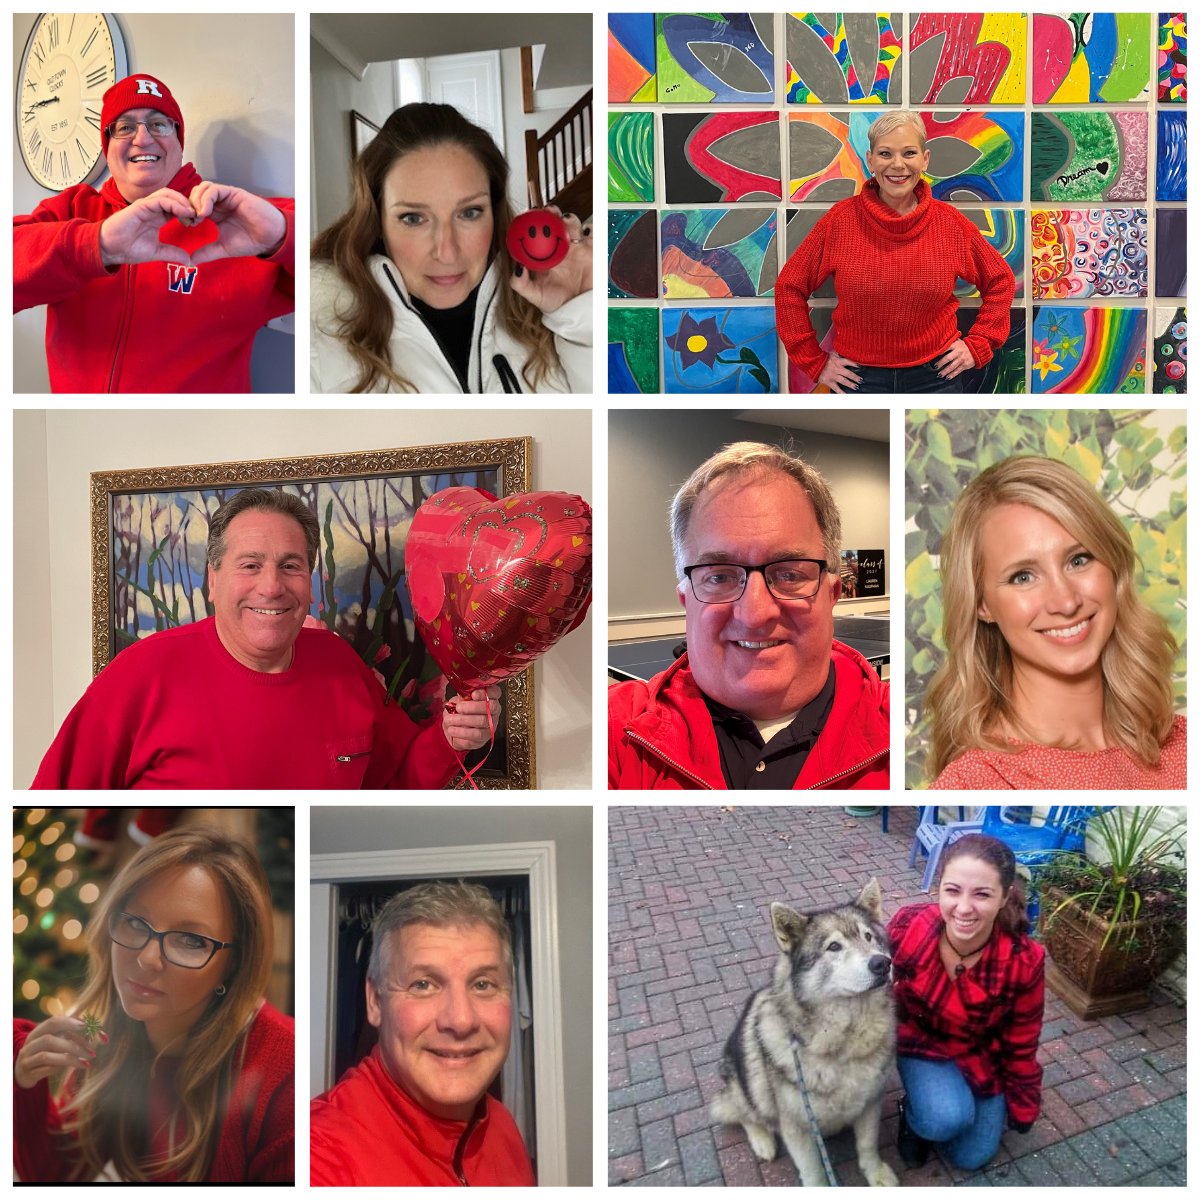 Let's spread the RED today!

National #WearRedDay is an opportunity to show support and raise awareness for heart disease during Heart Month, and the GoMo Health team understood the assignment. Show us your RED! #WhyGoMo

#HeartMonth #HeartDiseaseAwareness #Healthcare